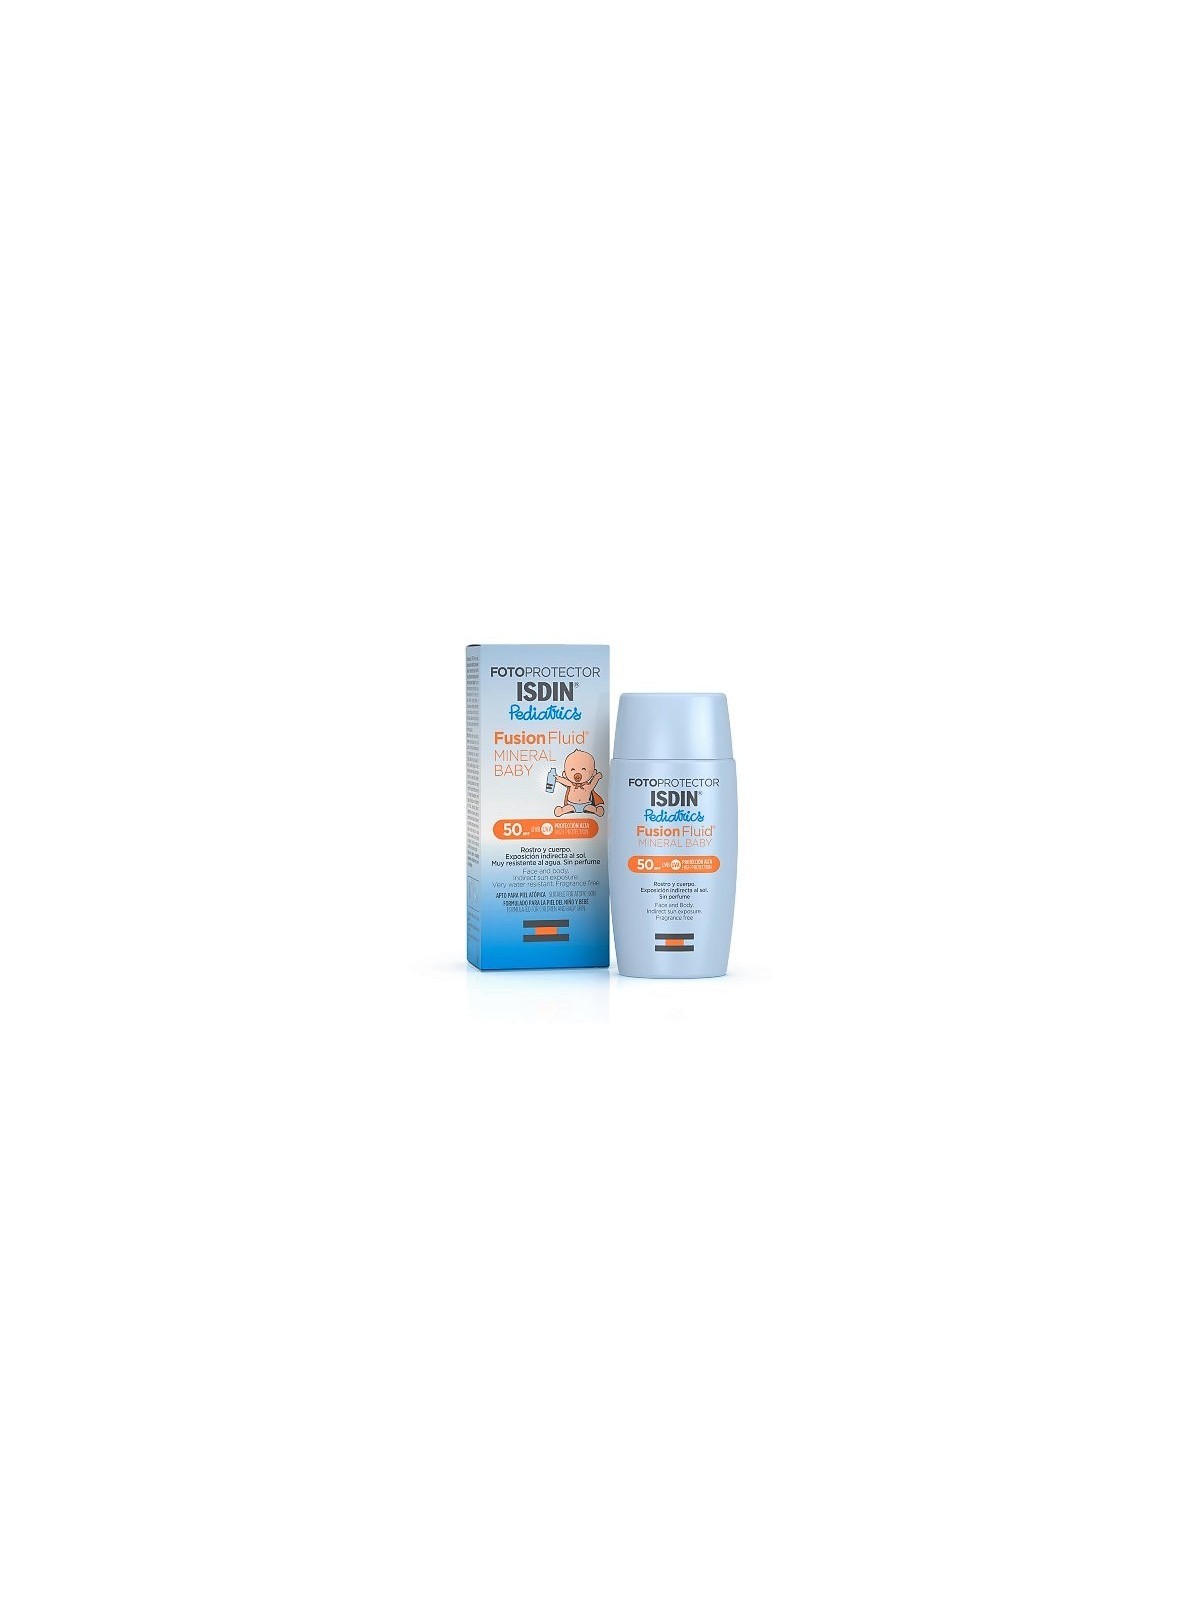 ISDIN FOTOPROTECTOR  MINERAL BABY SPF 50+ FUSION FLUID